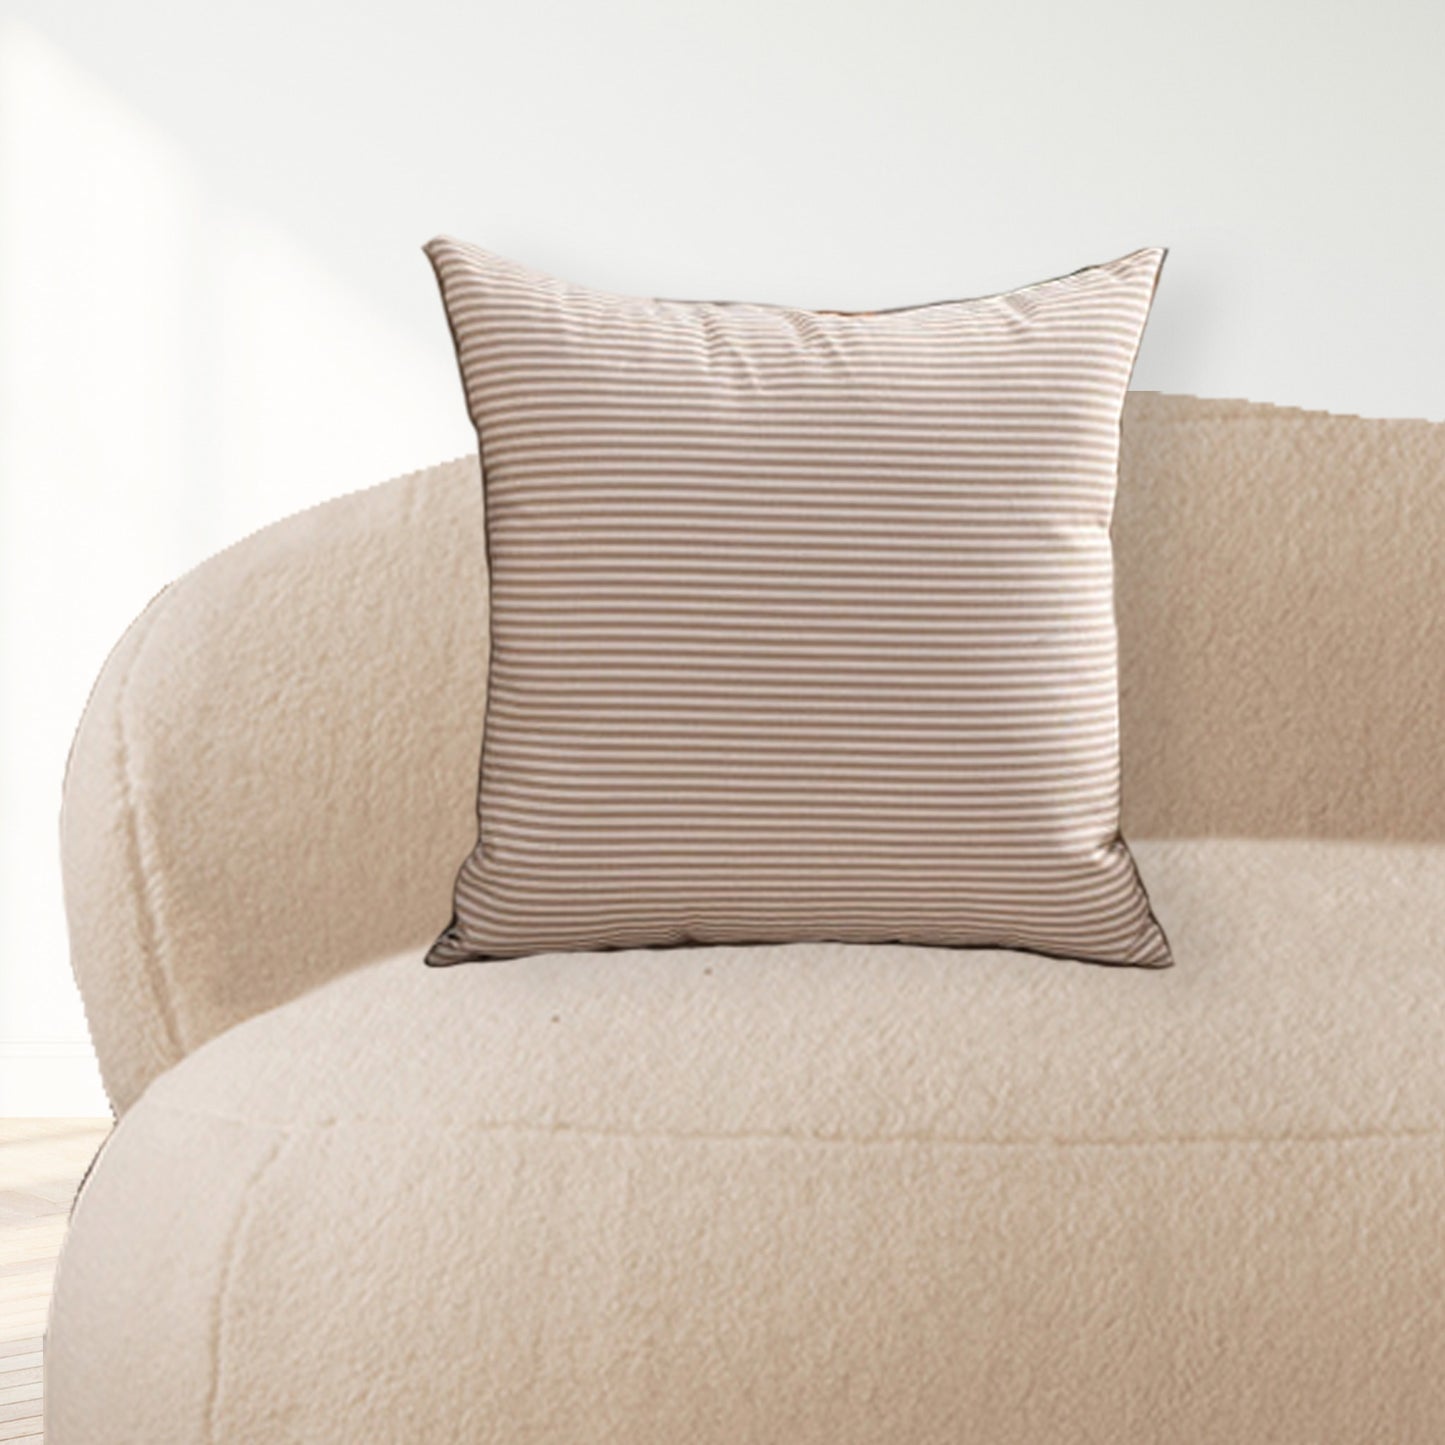 Caramel Coffee Lines Cushion Cover